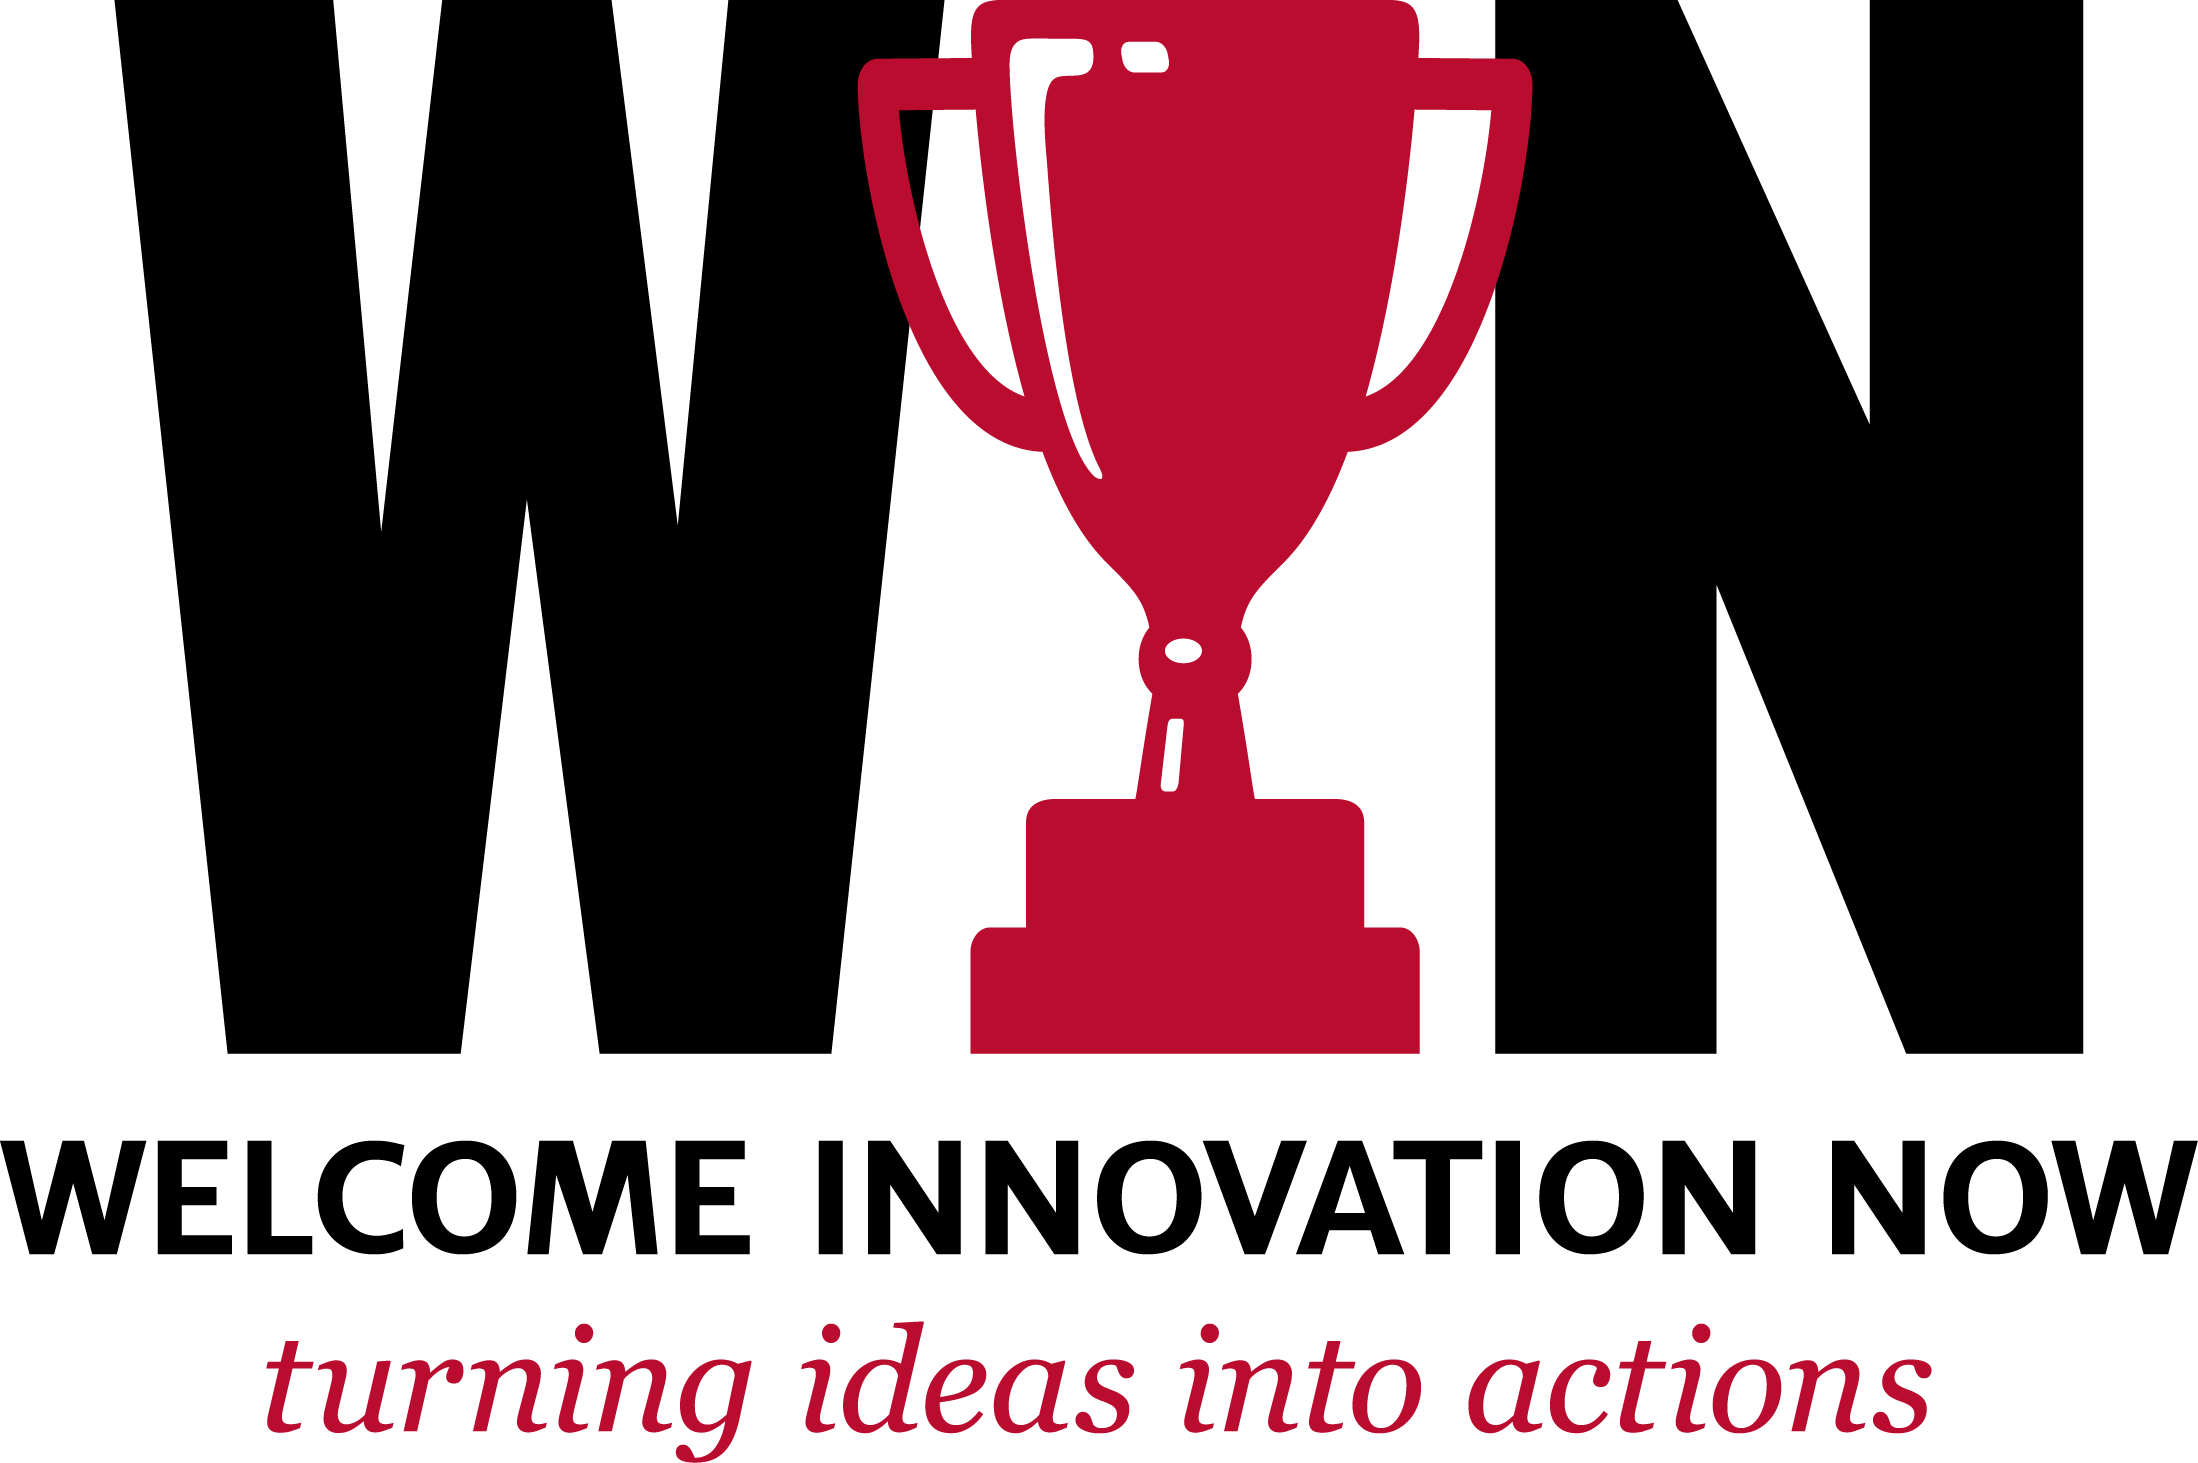 A text graphic that reads, "WIN; WELCOME INNOVATION NOW" in black text, and "turning ideas into actions" in red text. The "I" in "WIN" has been replaced with a red illustration of a trophy.